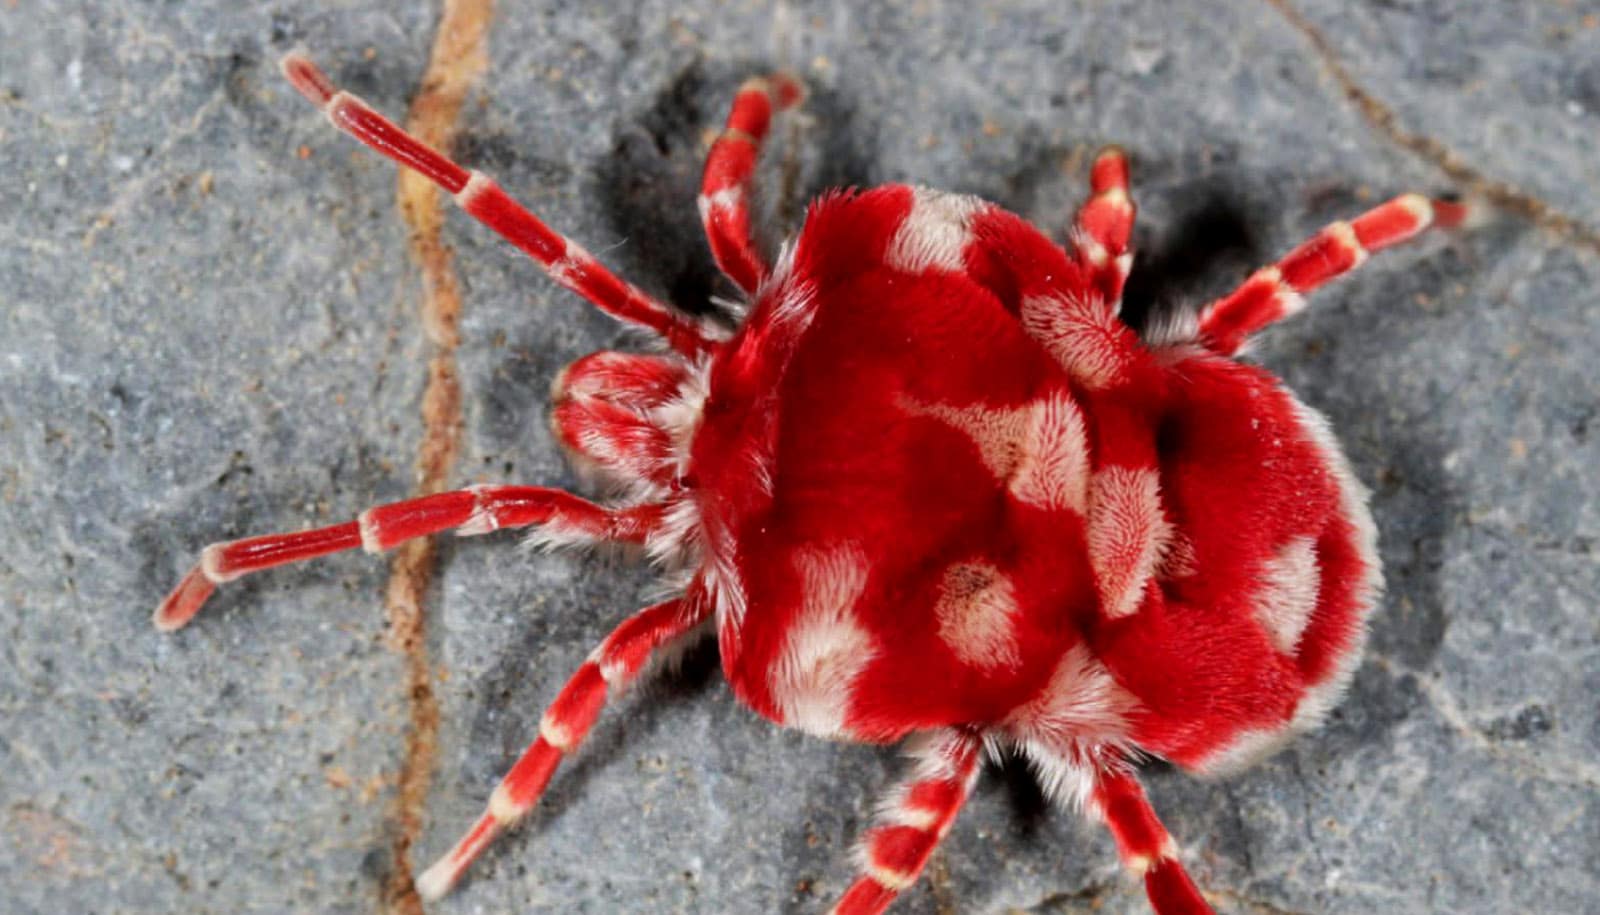 red velvety mite with white rings on legs and white blotches on body